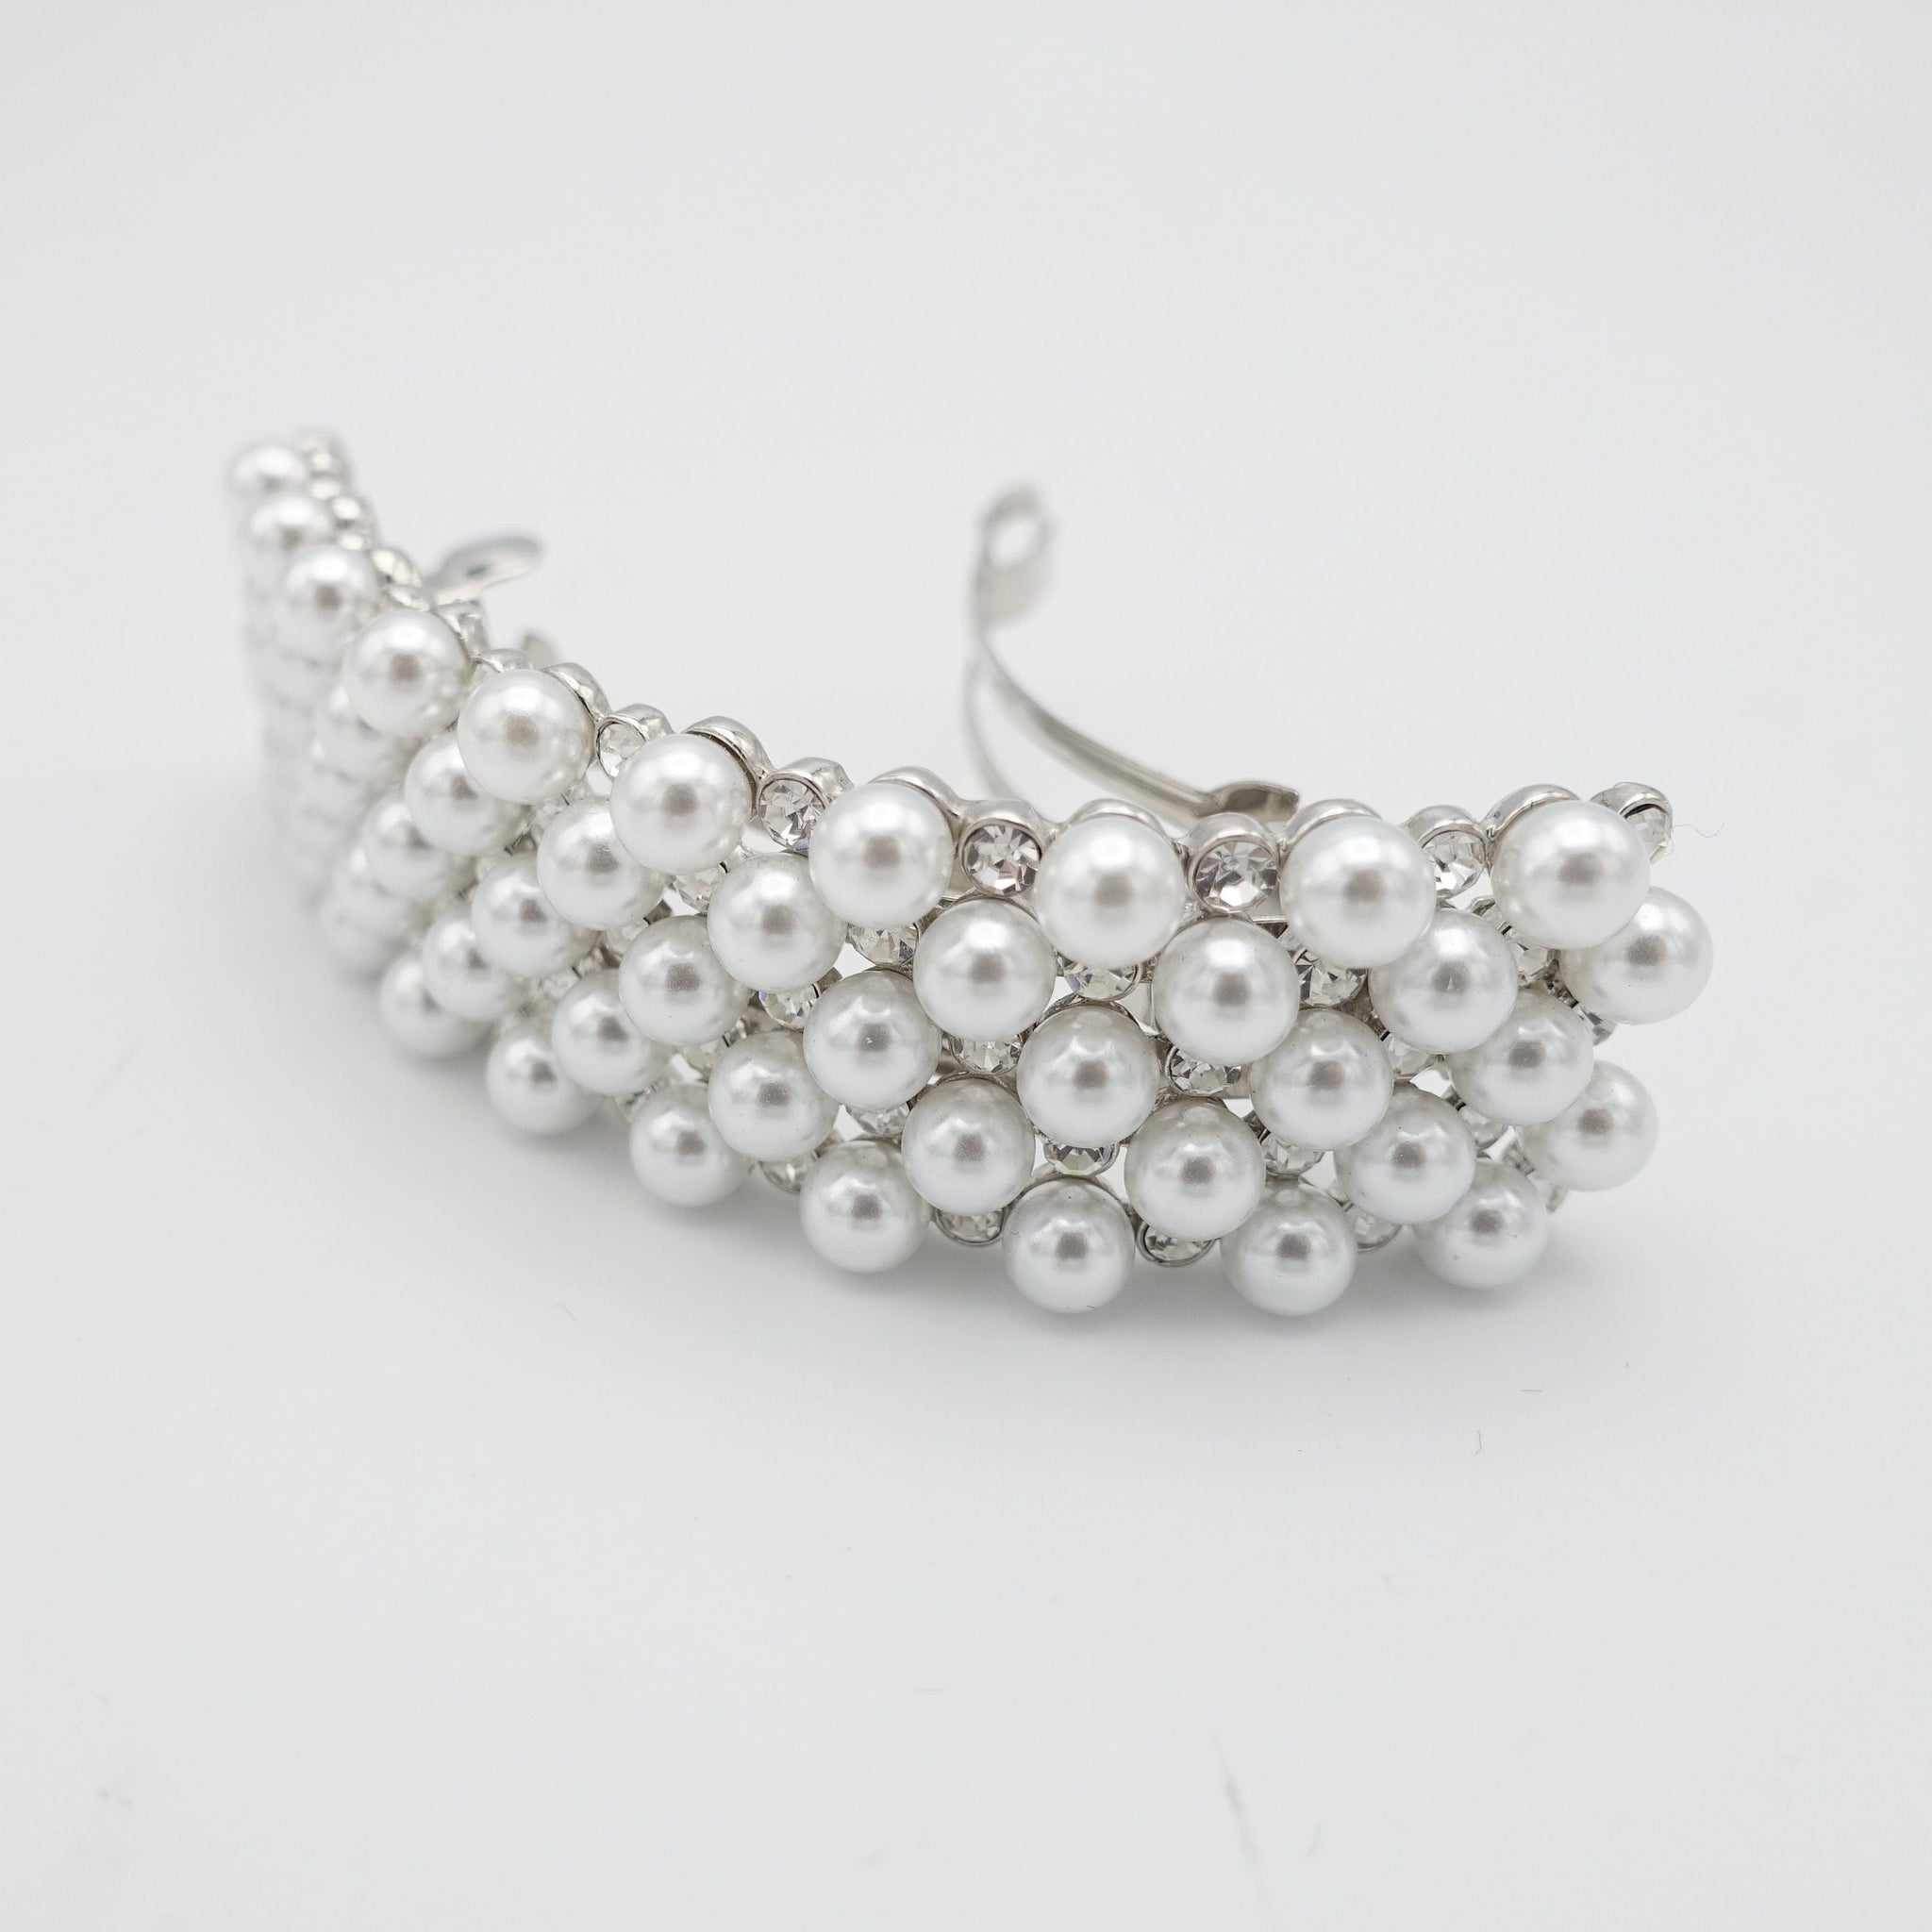 veryshine.com Silver curved rhinestone pearl hair barrette embellished rectangle barrette hair accessory for women